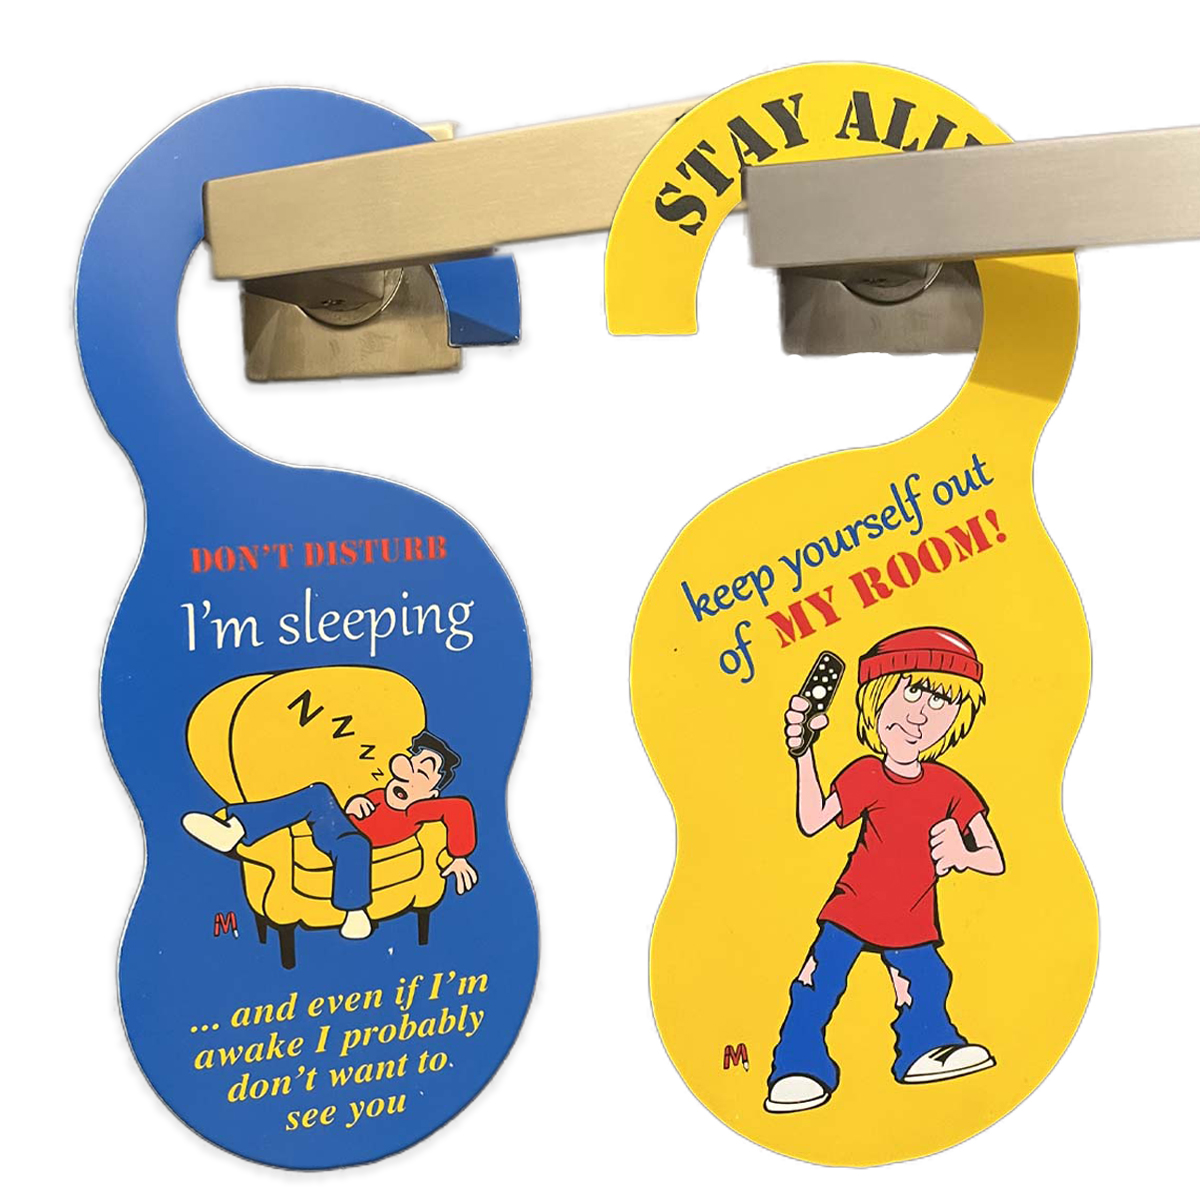 Memo Door Hanger Sign (Don’t Disturb. I’m Sleeping) & (Stay Alive Keep Yourself Out of My Room)